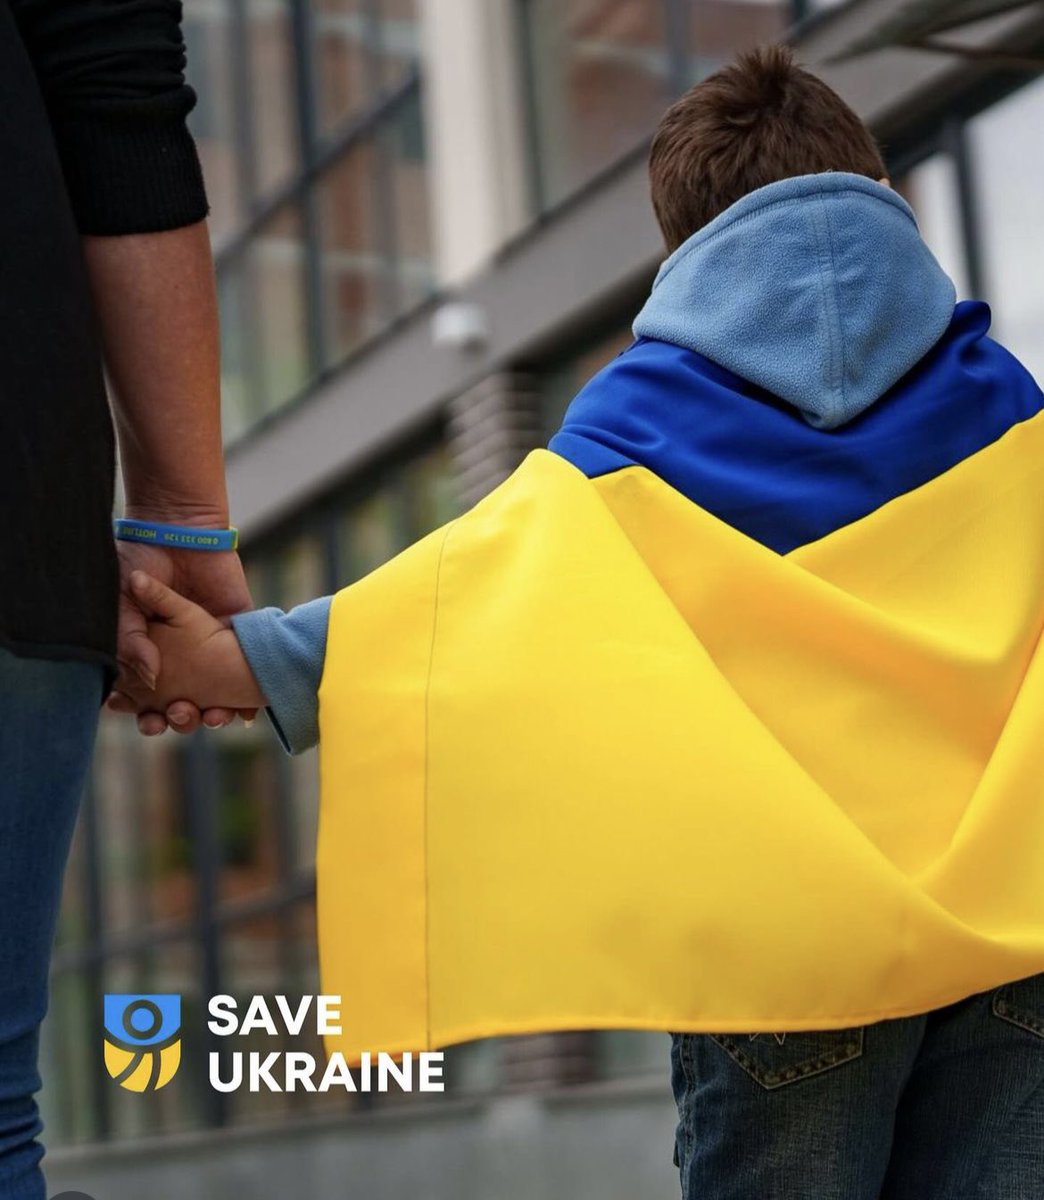 Spoke with @MykolaKuleba from @SaveukraineUs today about the heart-wrenching situation of Ukrainian children who have been deported by Russia. I have great appreciation for their important work and we are exploring additional ways to support them.